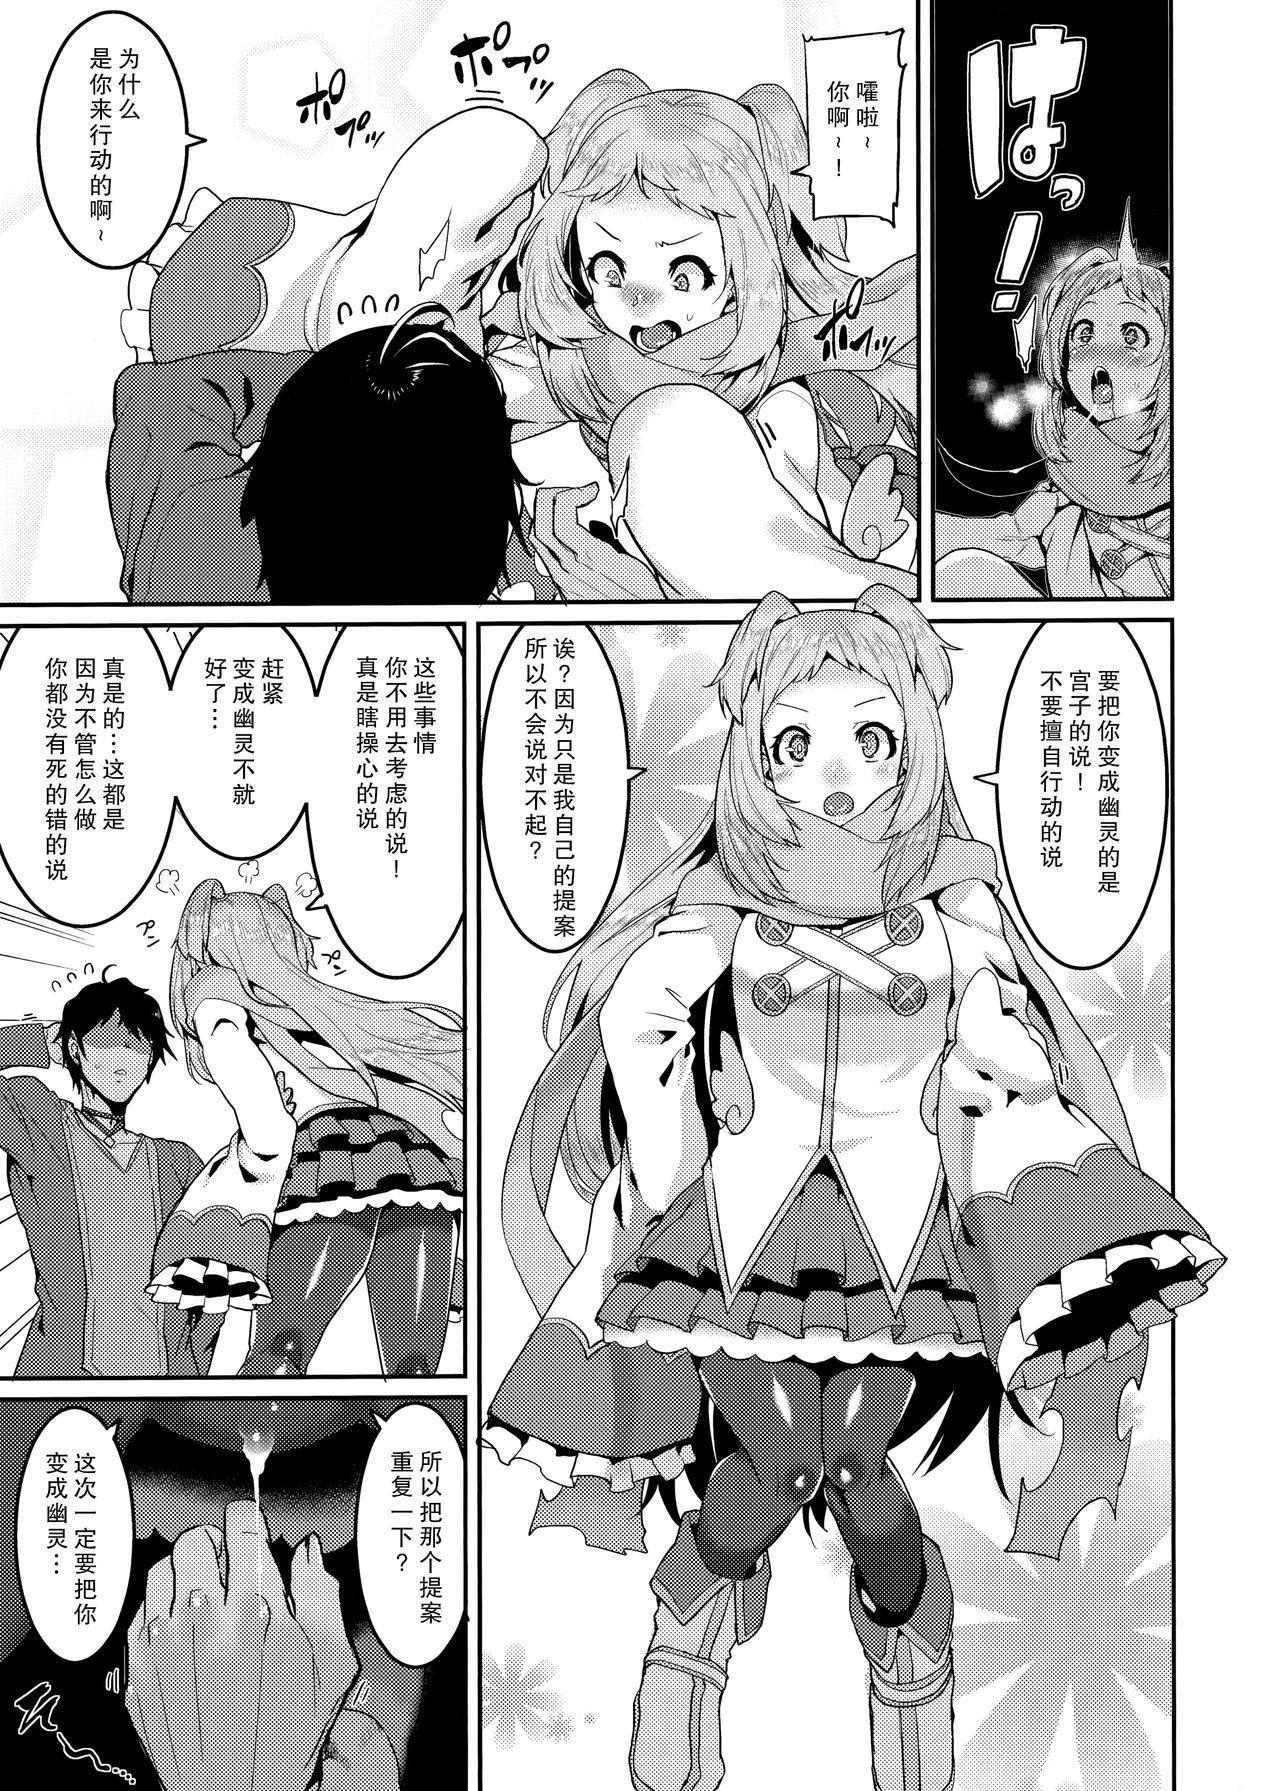 Free Amature Porn (C96) [HBO (Henkuma)] Pudding Switch (Princess Connect! Re:Dive) [Chinese] 【零食汉化组】 - Princess connect Hardcorend - Page 8